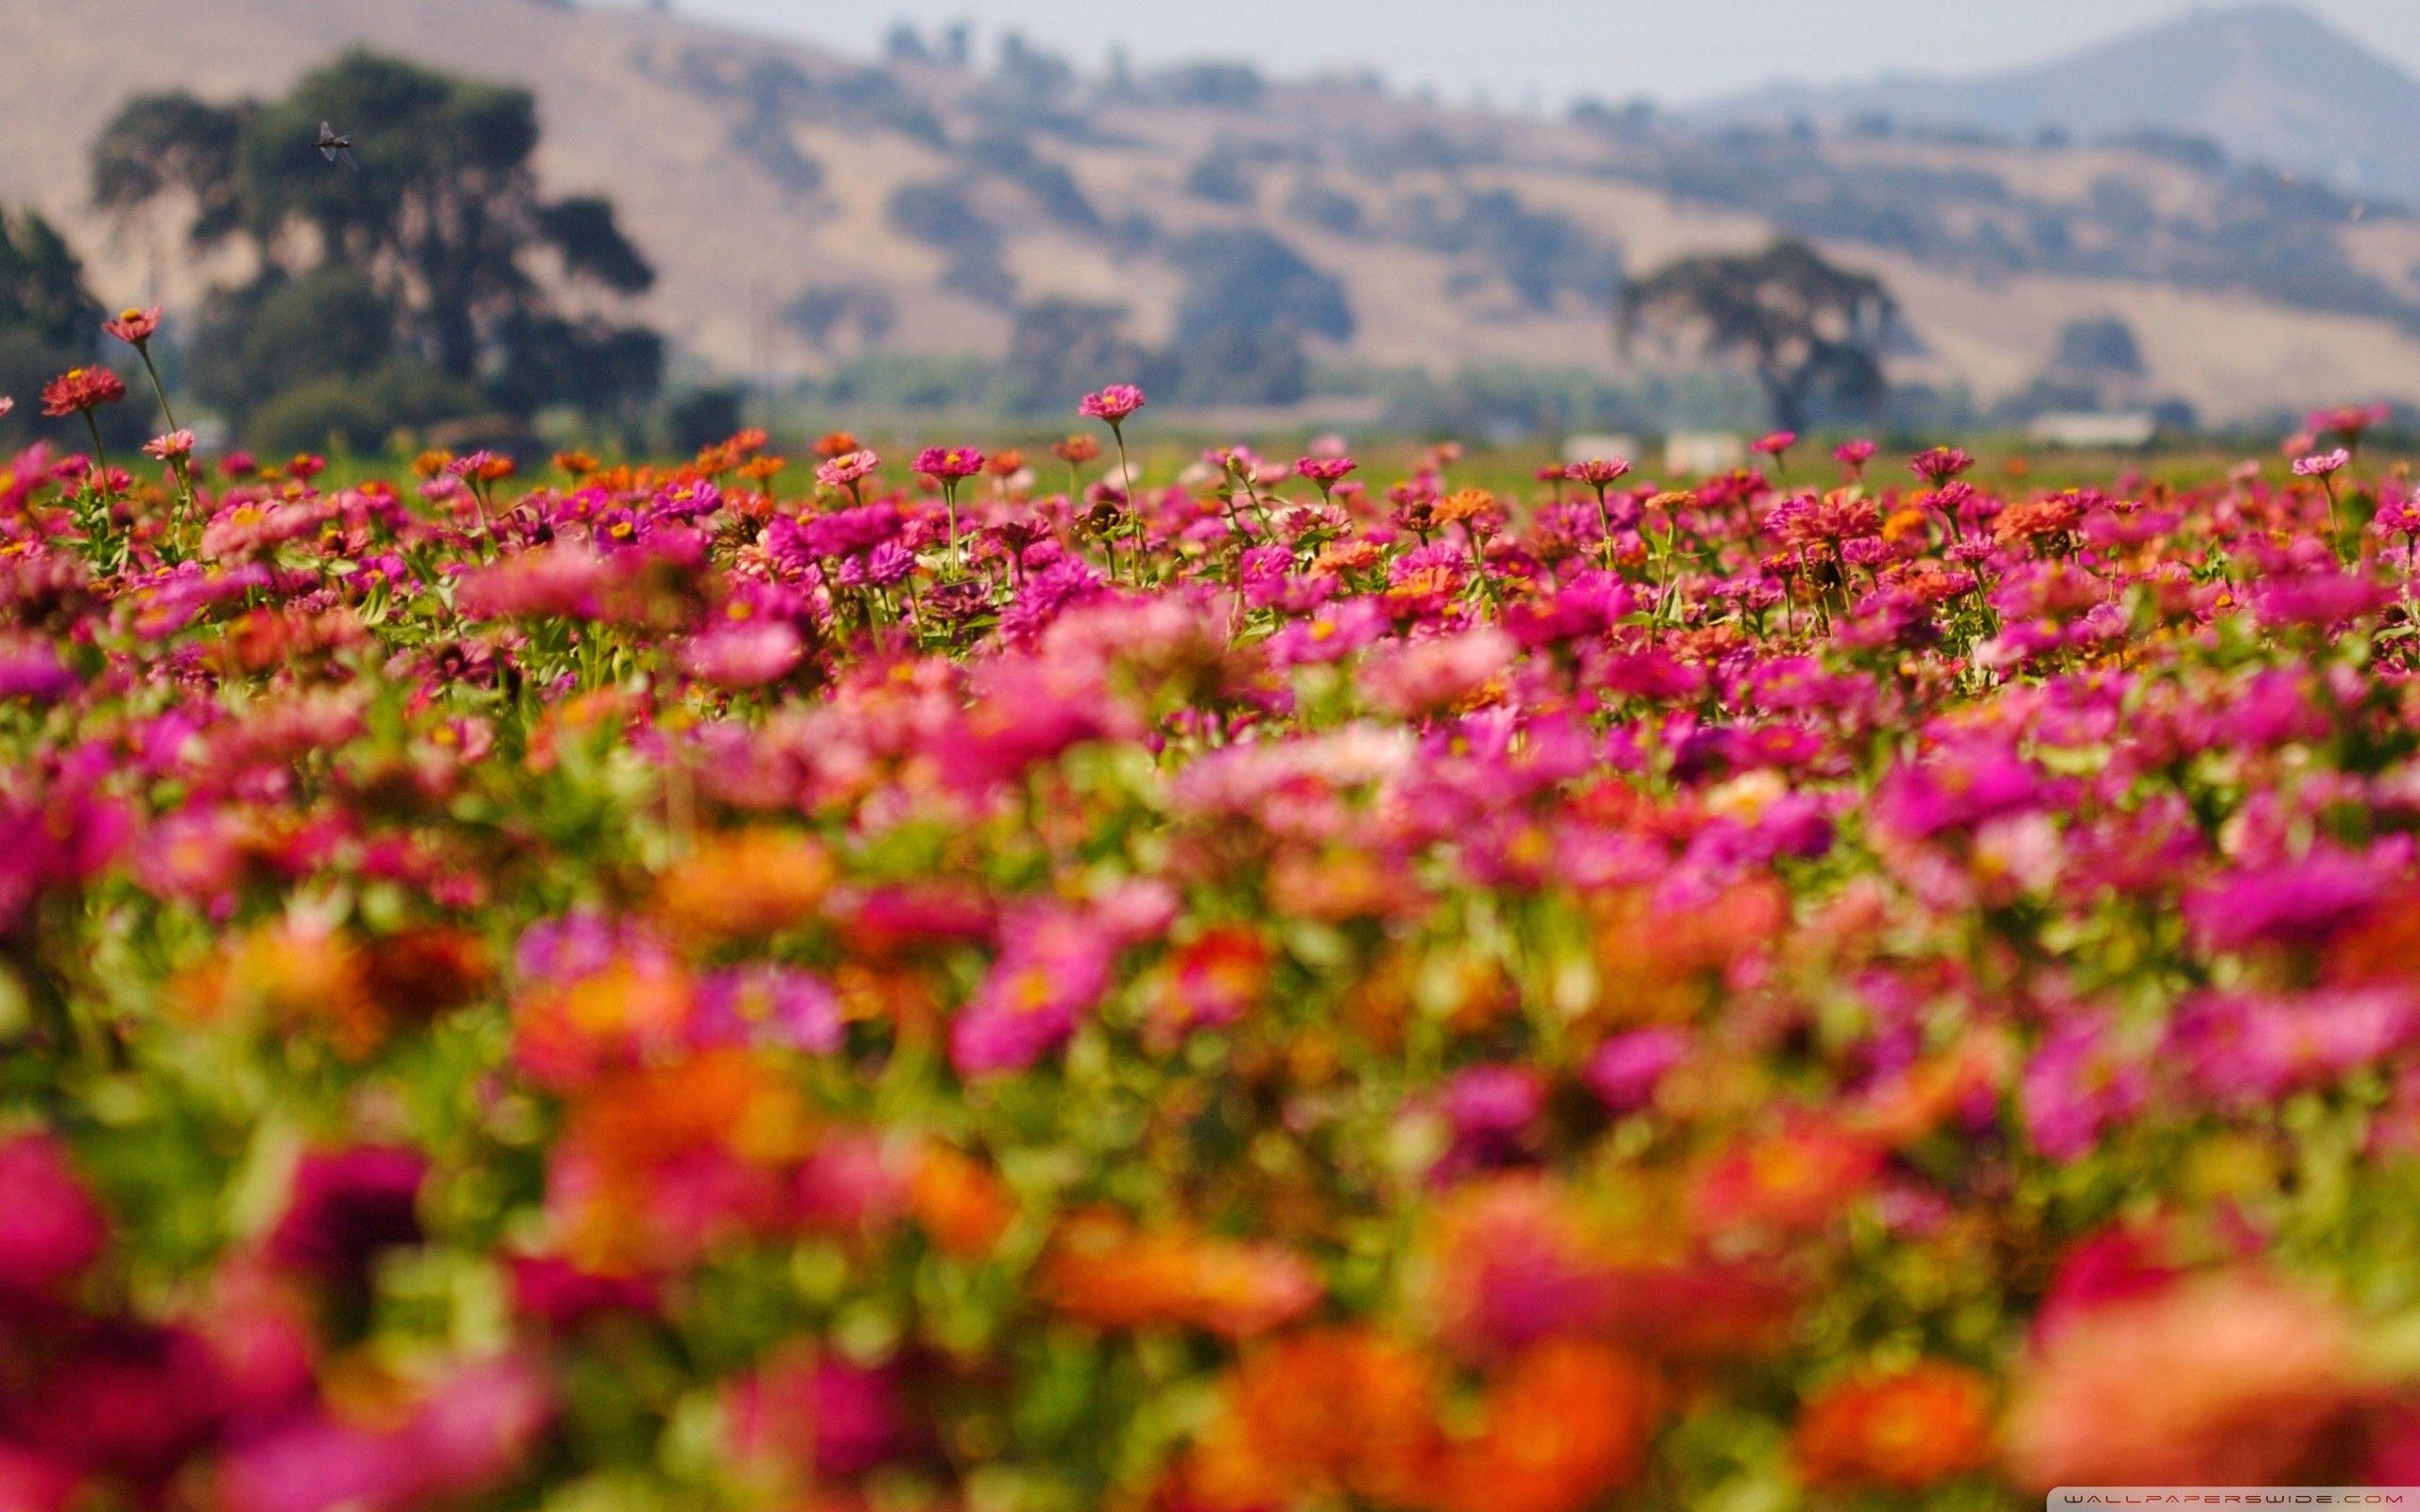 500 Flower Field Pictures HD  Download Free Images on Unsplash